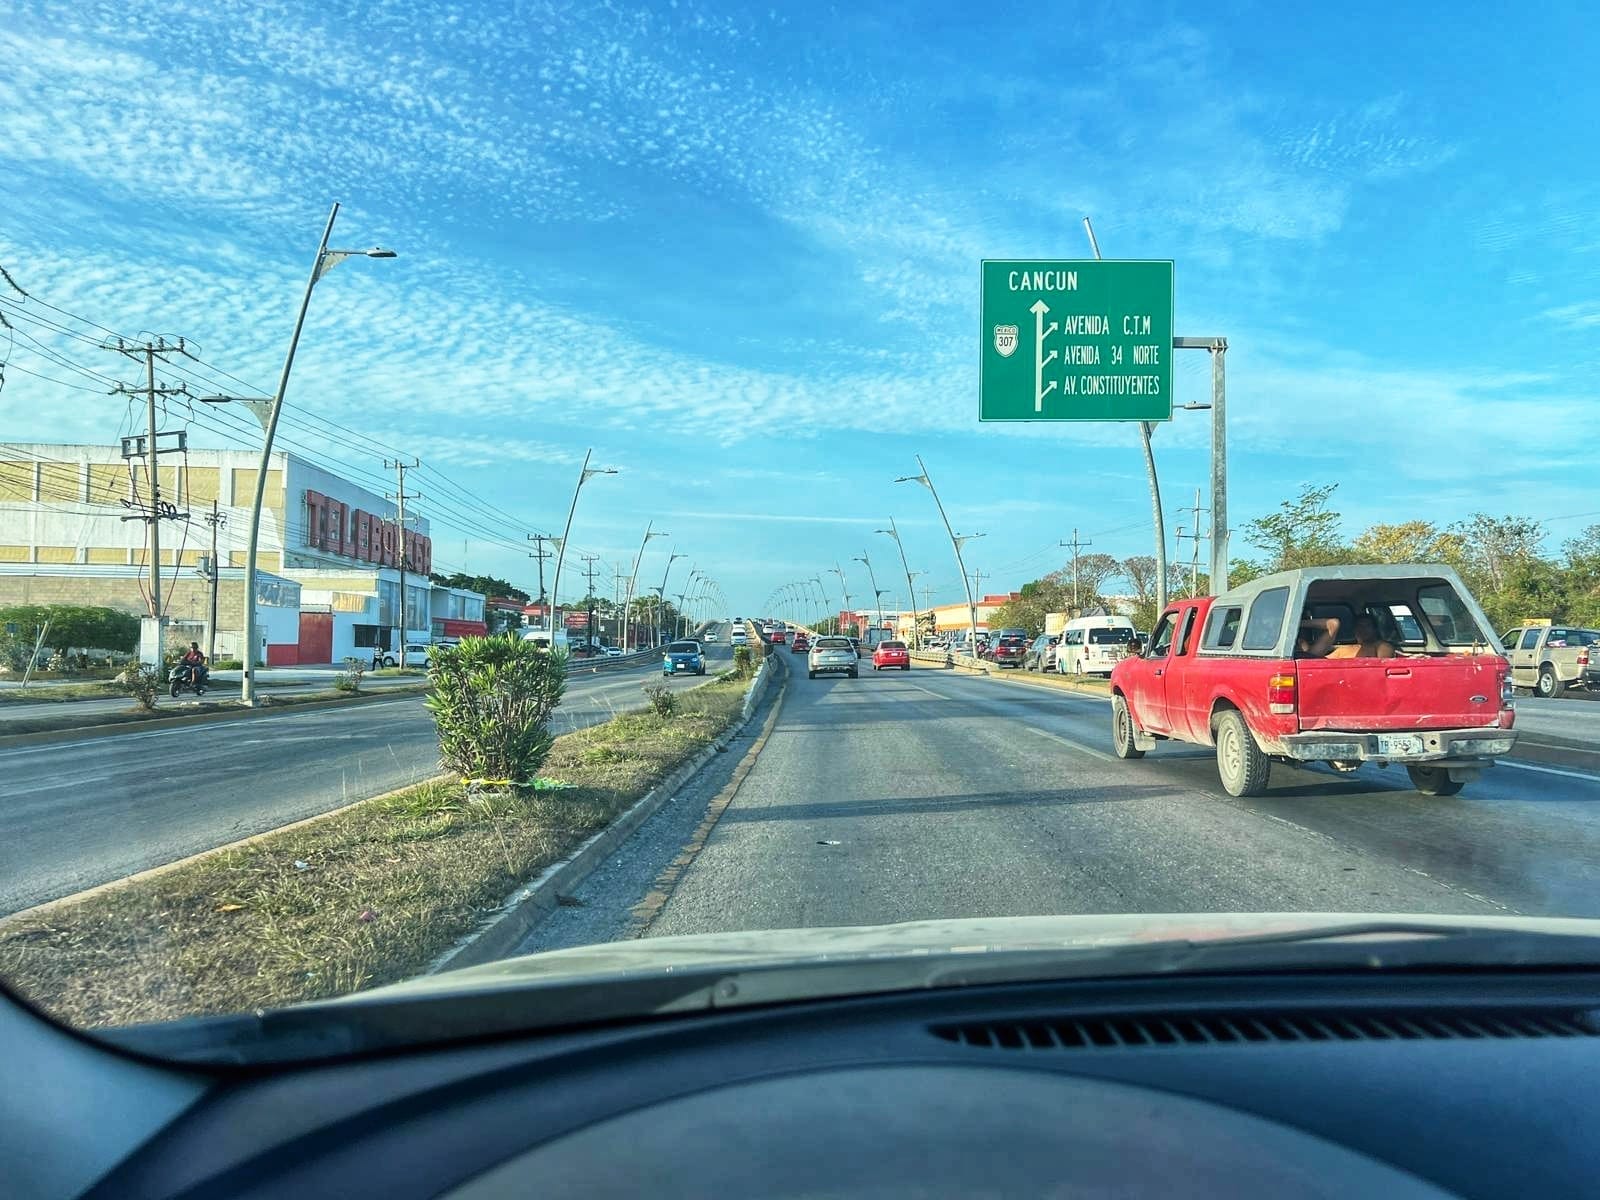 View from inside a car showing a highway in Yucatan, Mexico, with cars and a street sign indicating directions to Cancun, Avenida C.T.M, and Avenida 34 Norte.